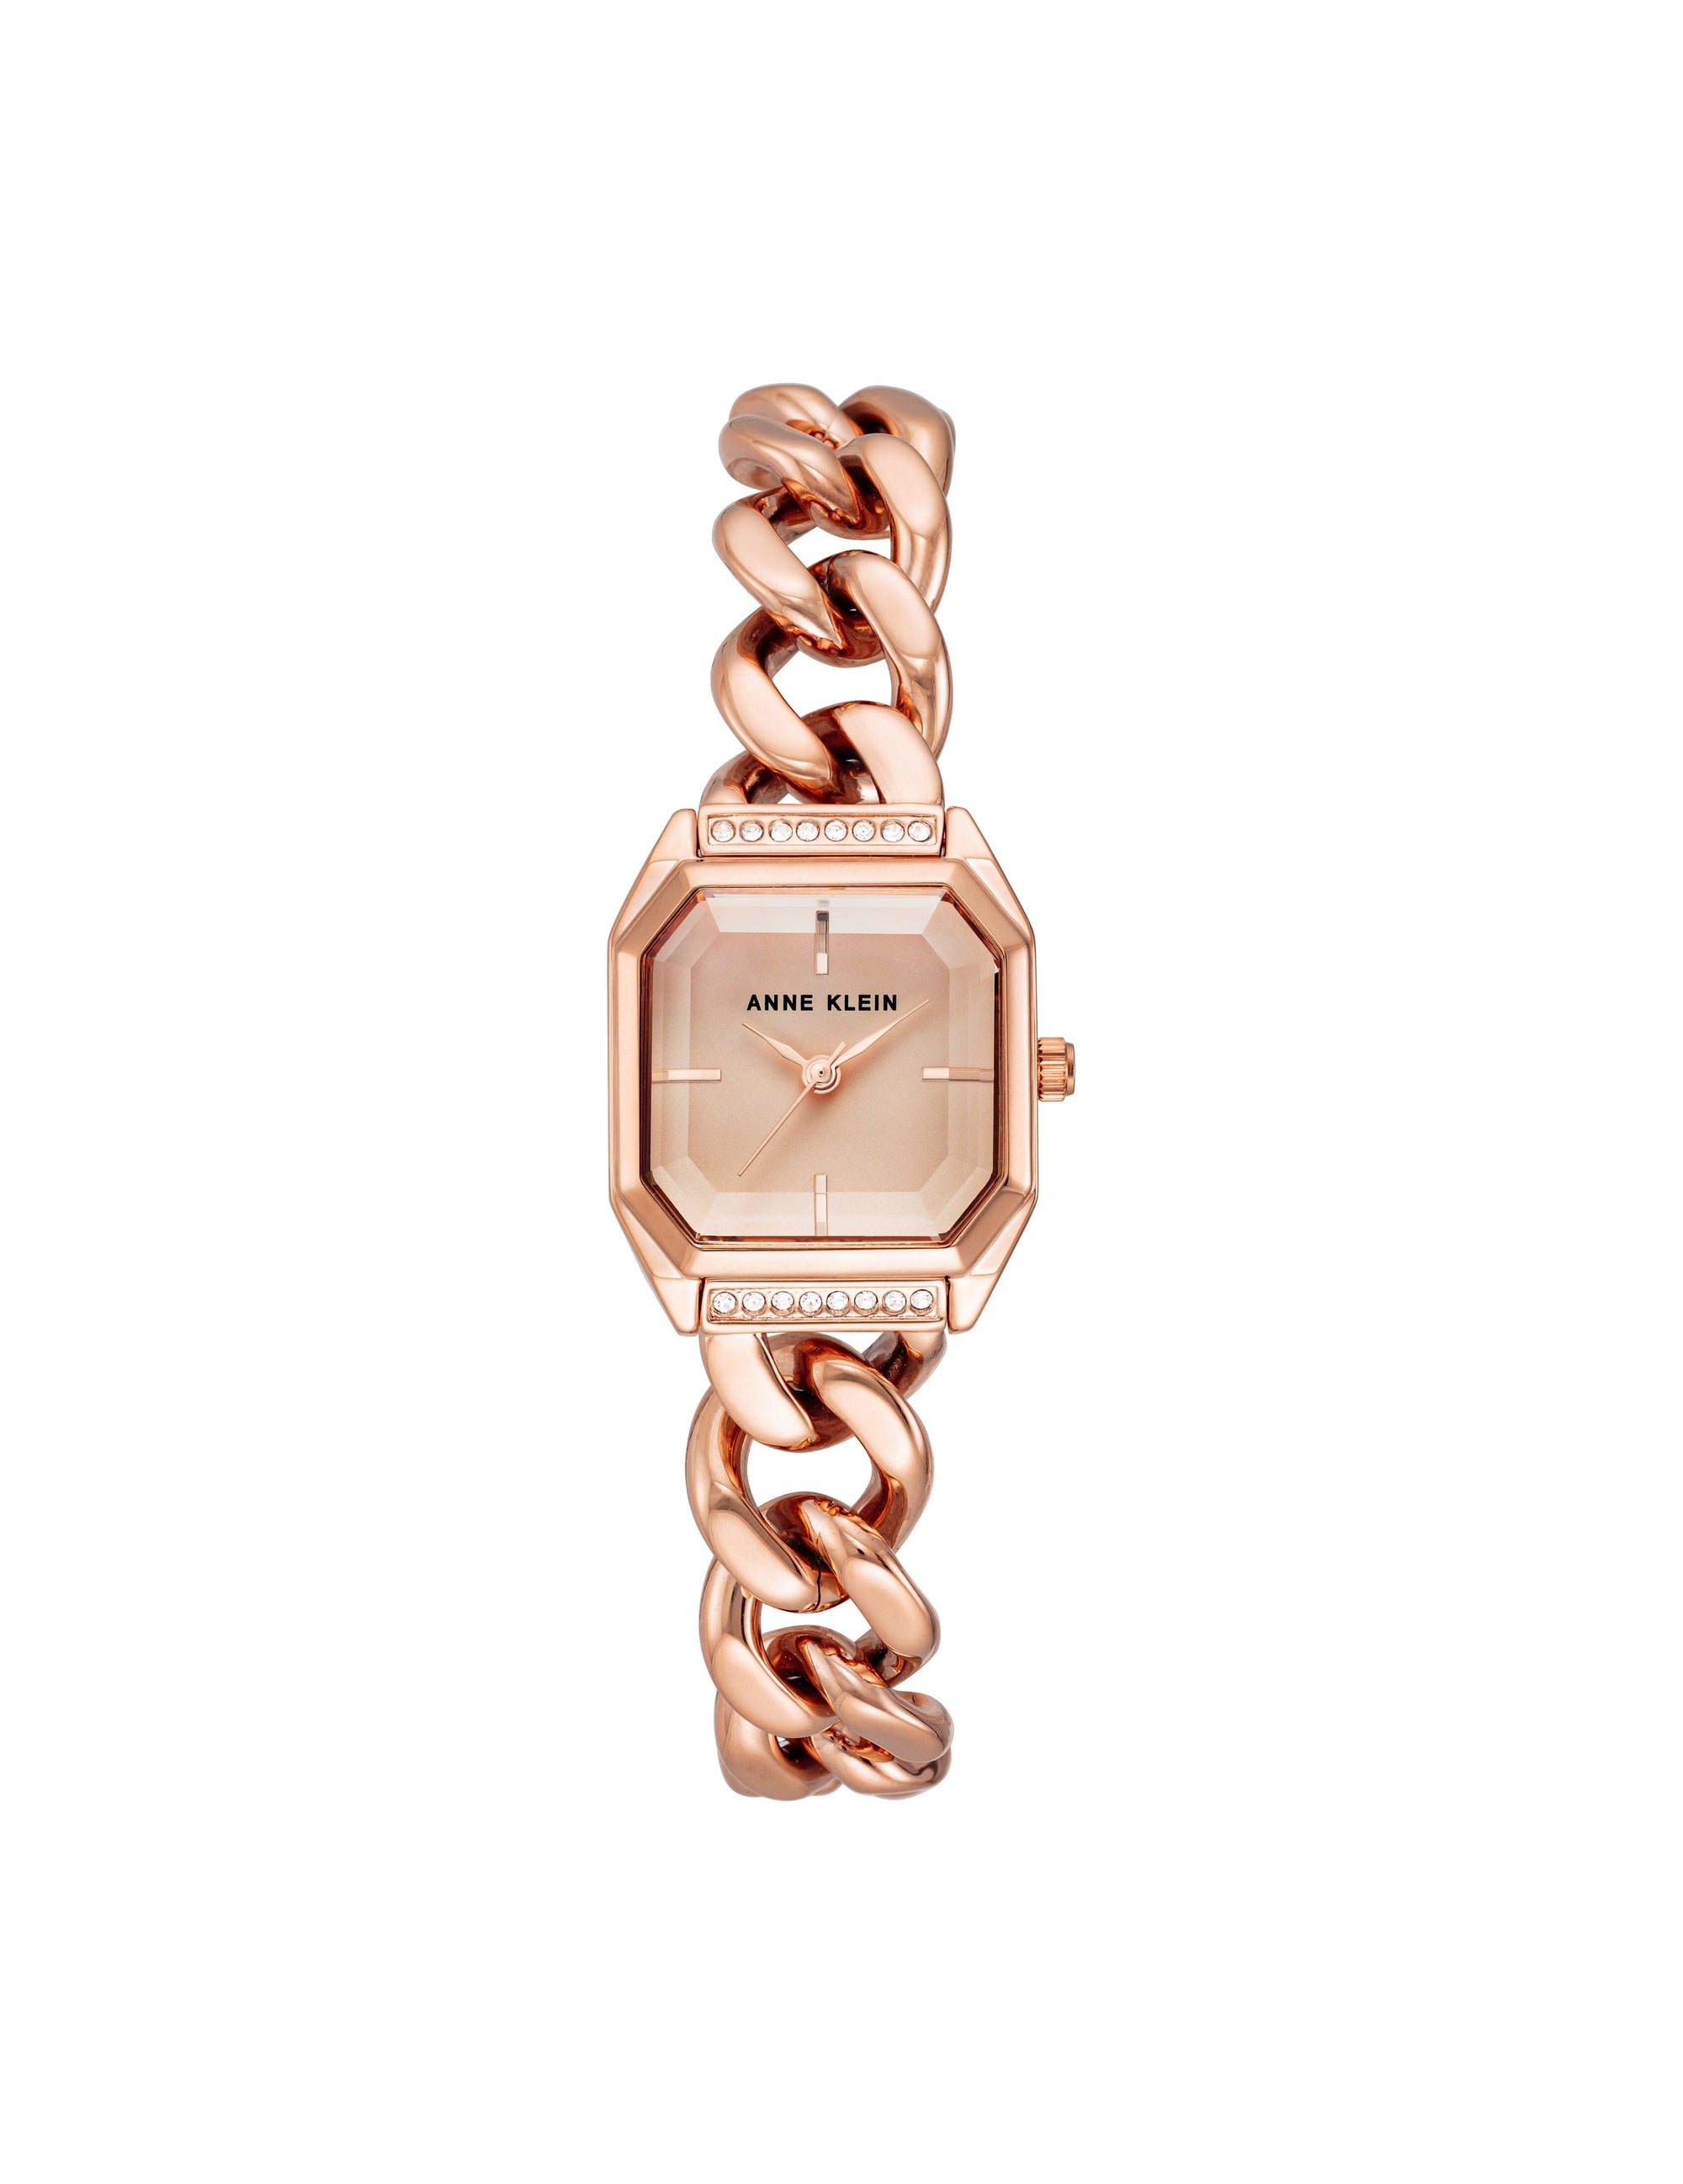 Octagonal Crystal Accented Chain Bracelet Watch